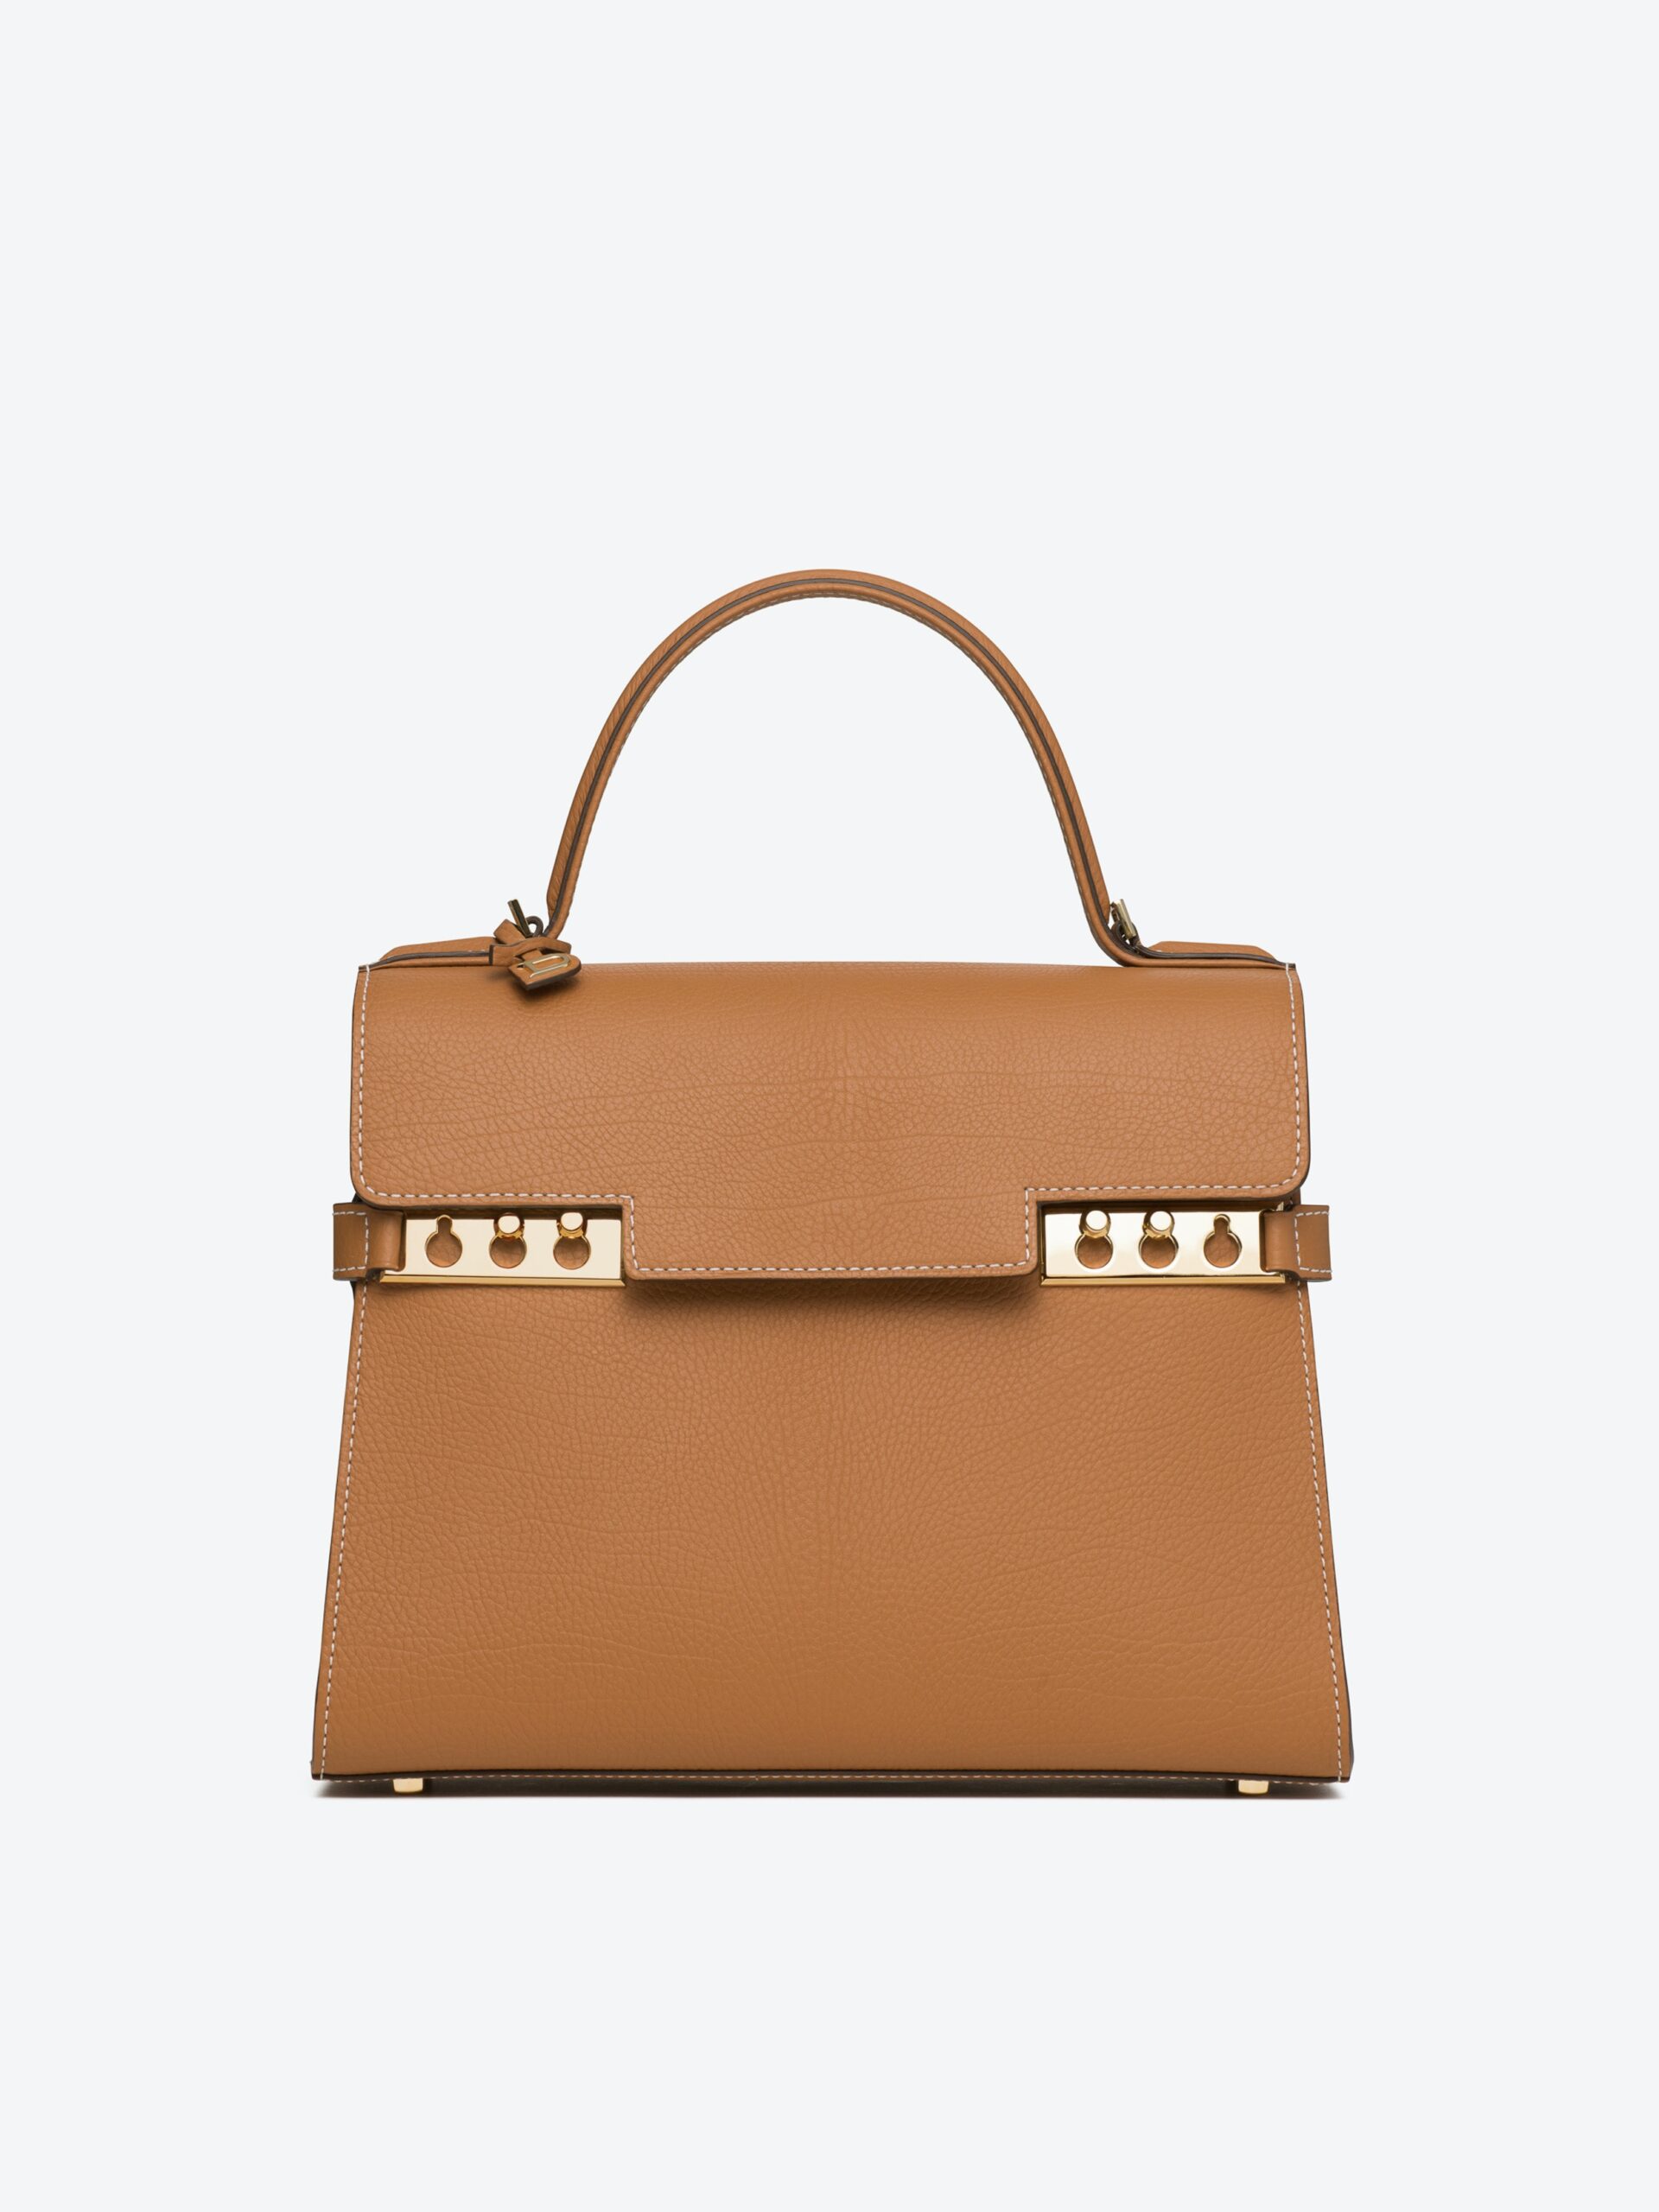 Delvaux Brillant bag  Better than Hermes Birkin and Kelly? 